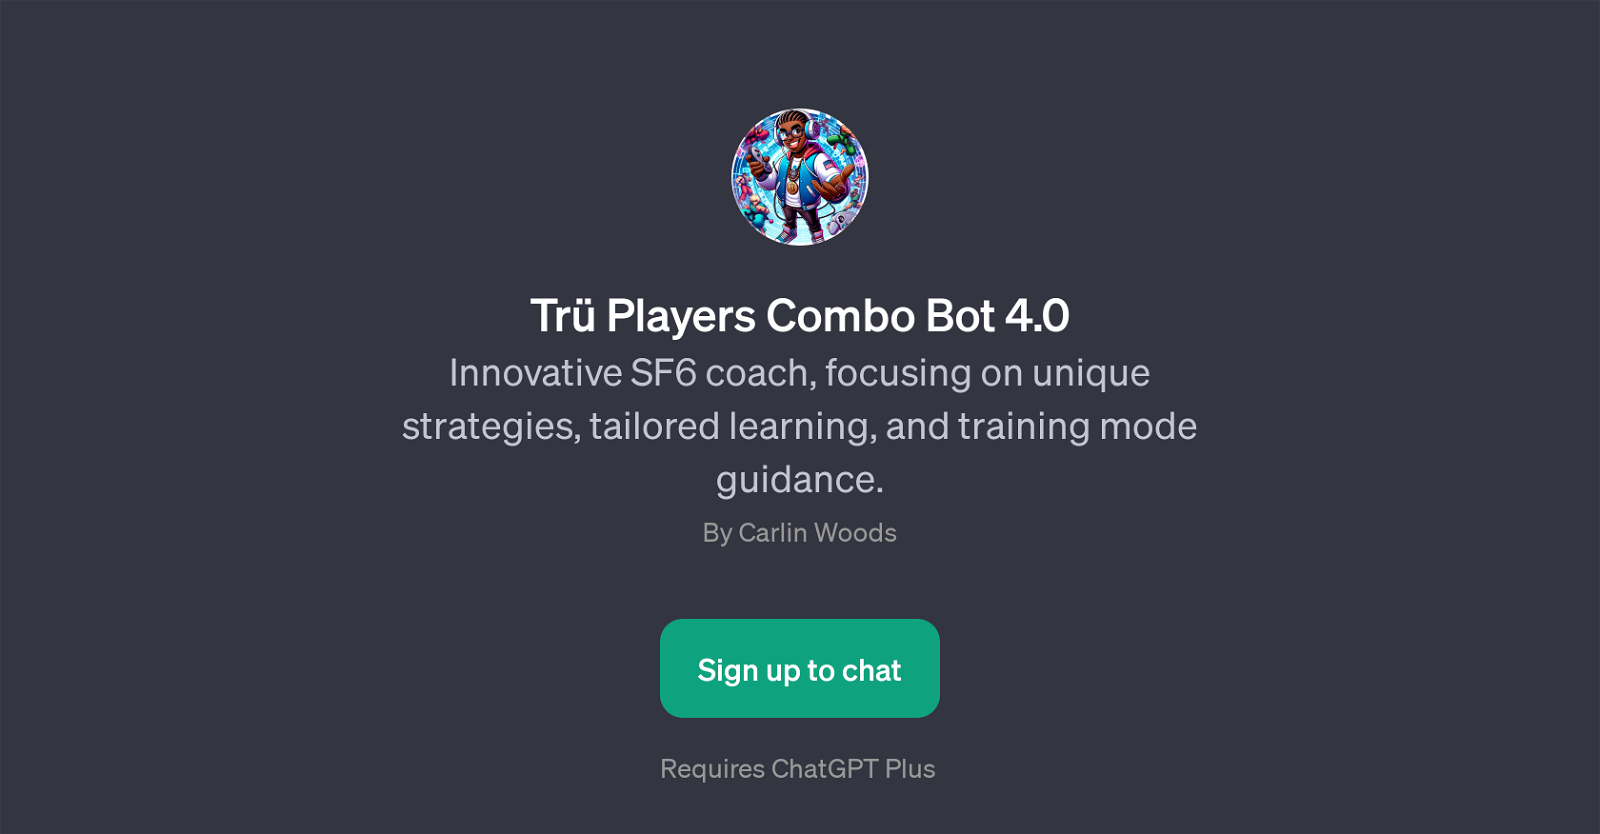 Tr Players Combo Bot 4.0 website